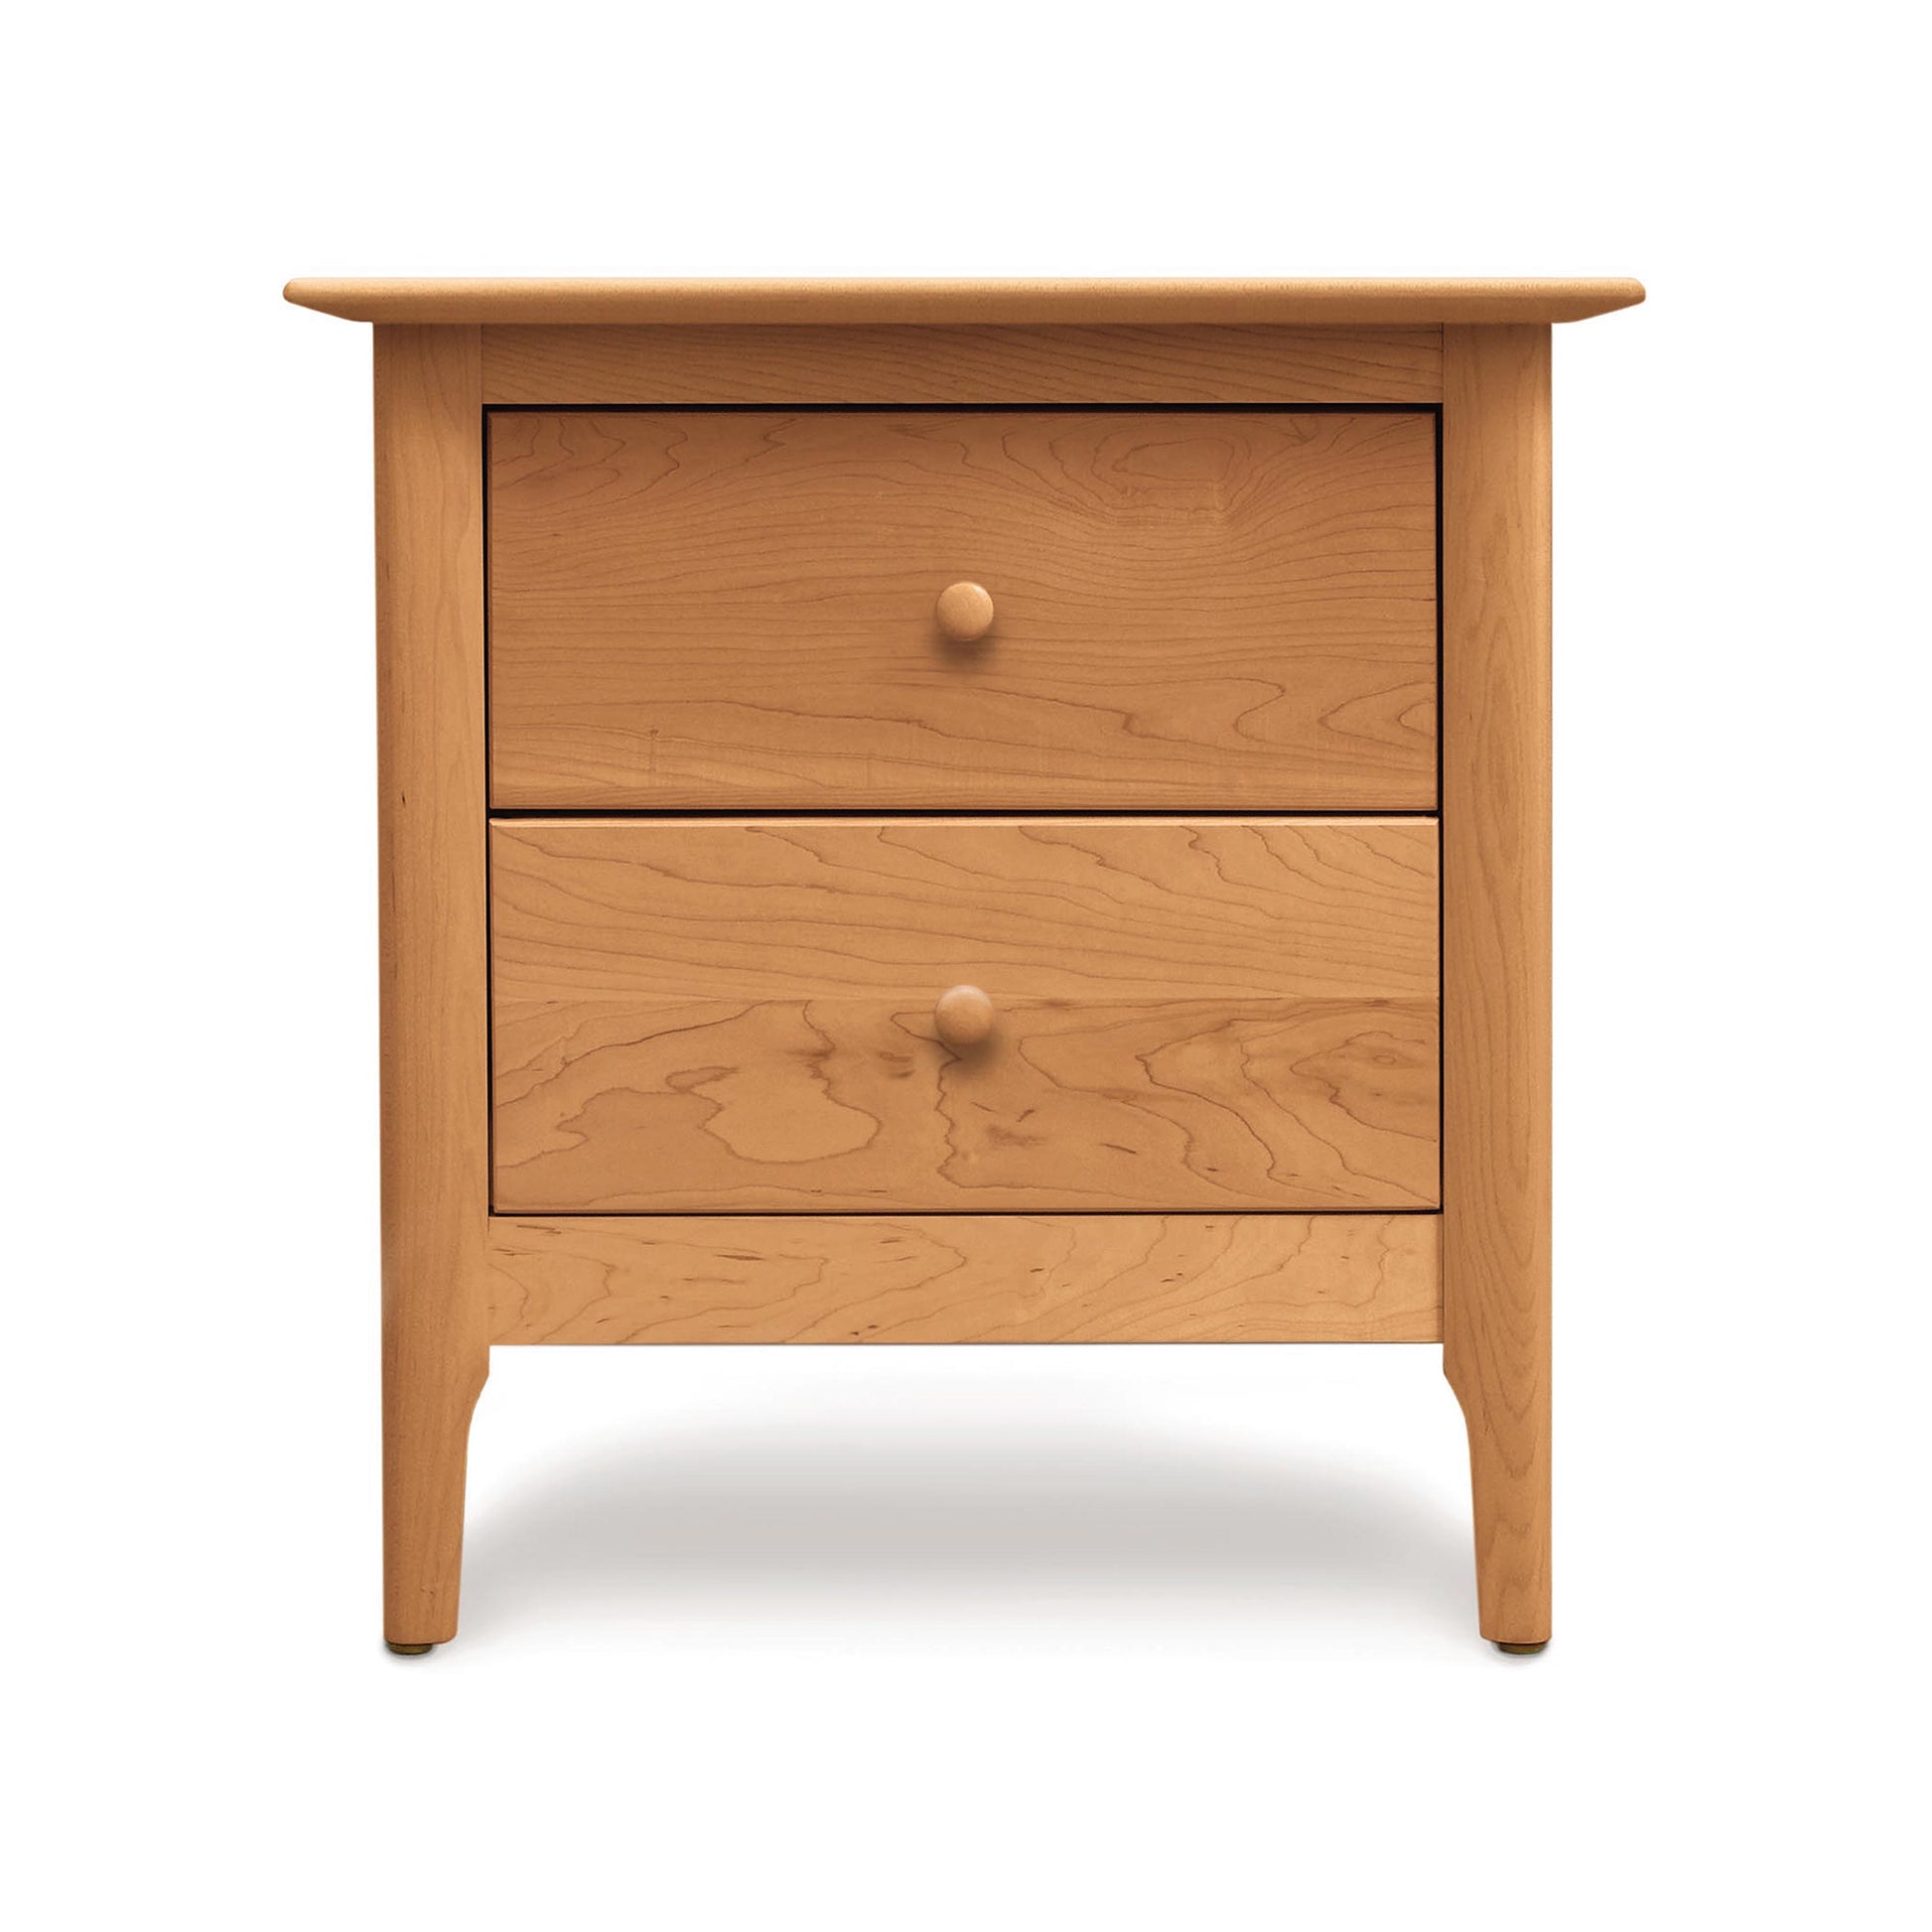 A Sarah two-drawer nightstand from Copeland Furniture, crafted from sustainable harvested wood, in a simple design isolated on a white background.